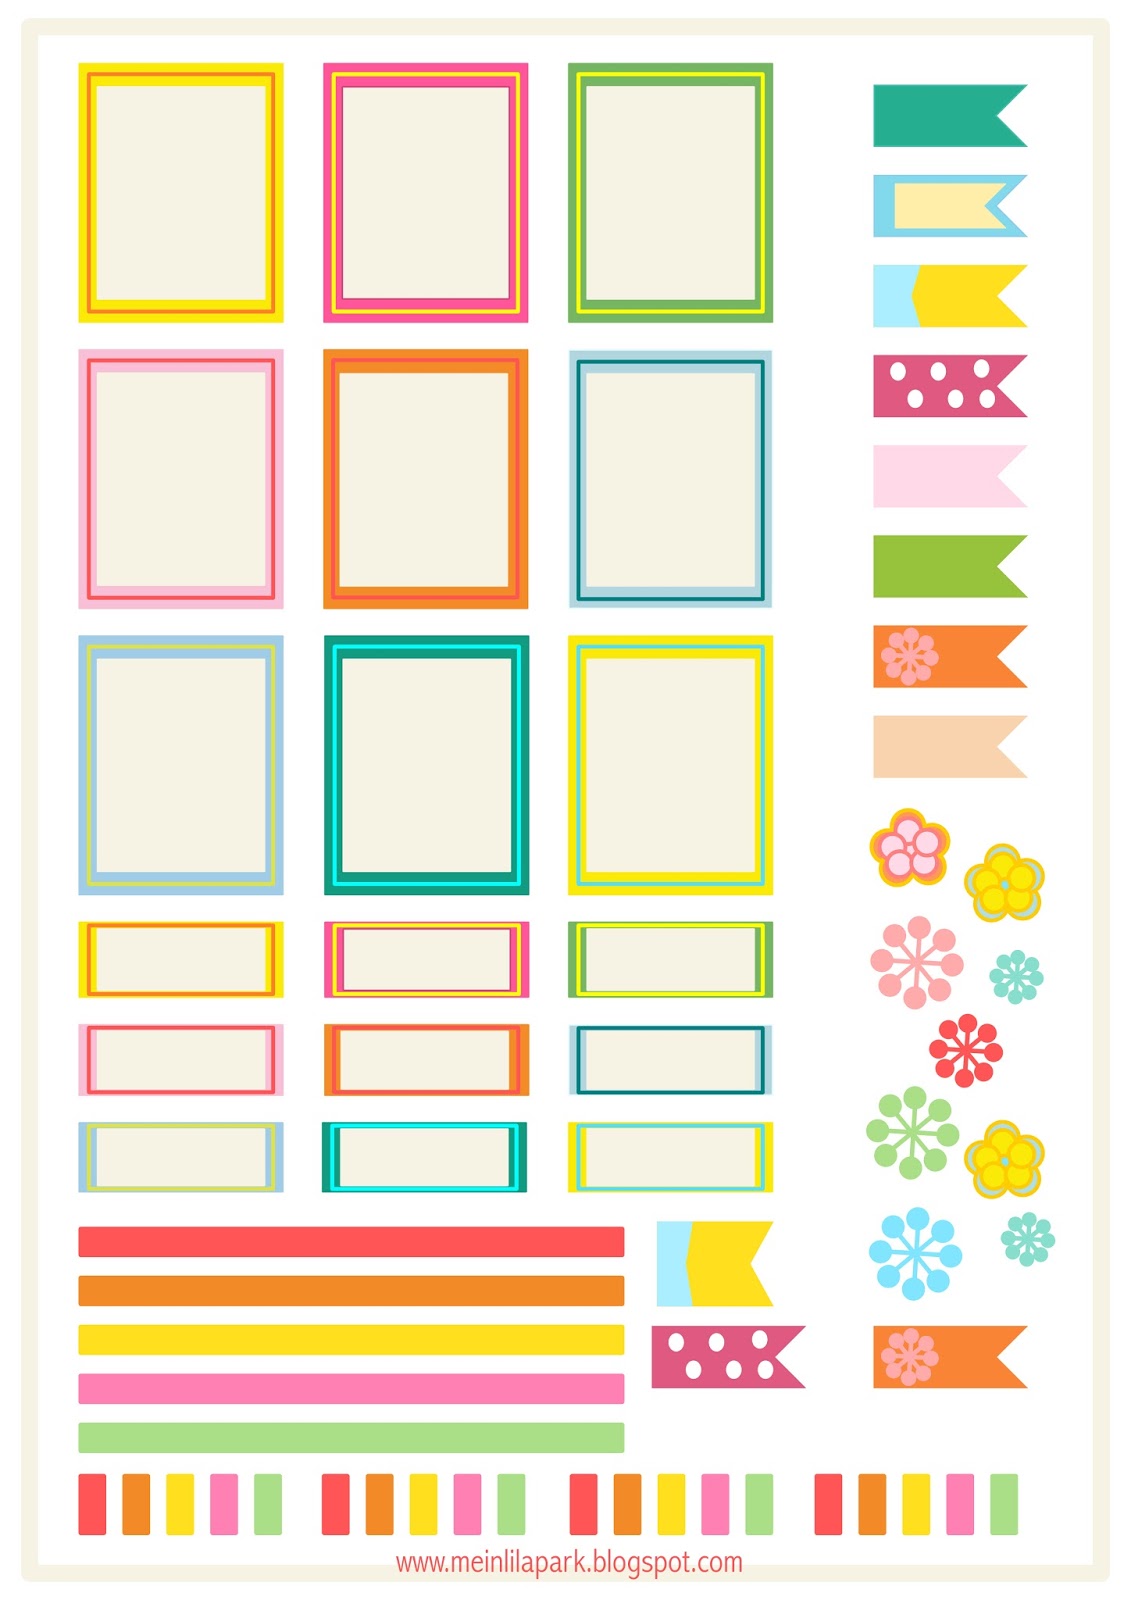 free-printable-planner-stickers-printable-world-holiday